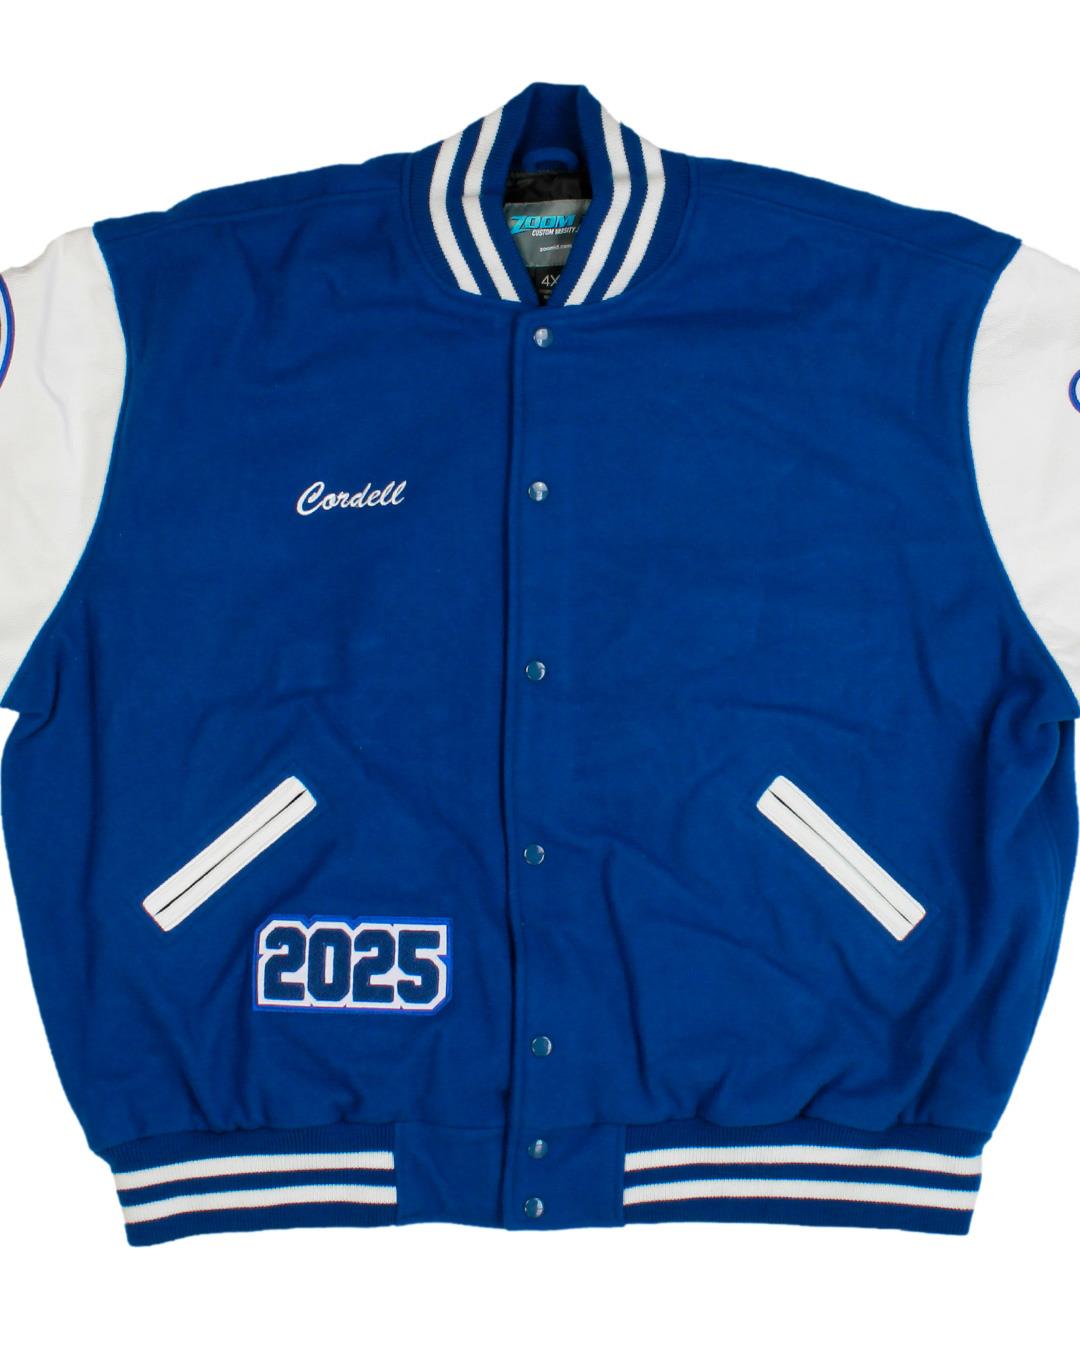 Amity High School Letterman Jacket, Amity, OR - Front